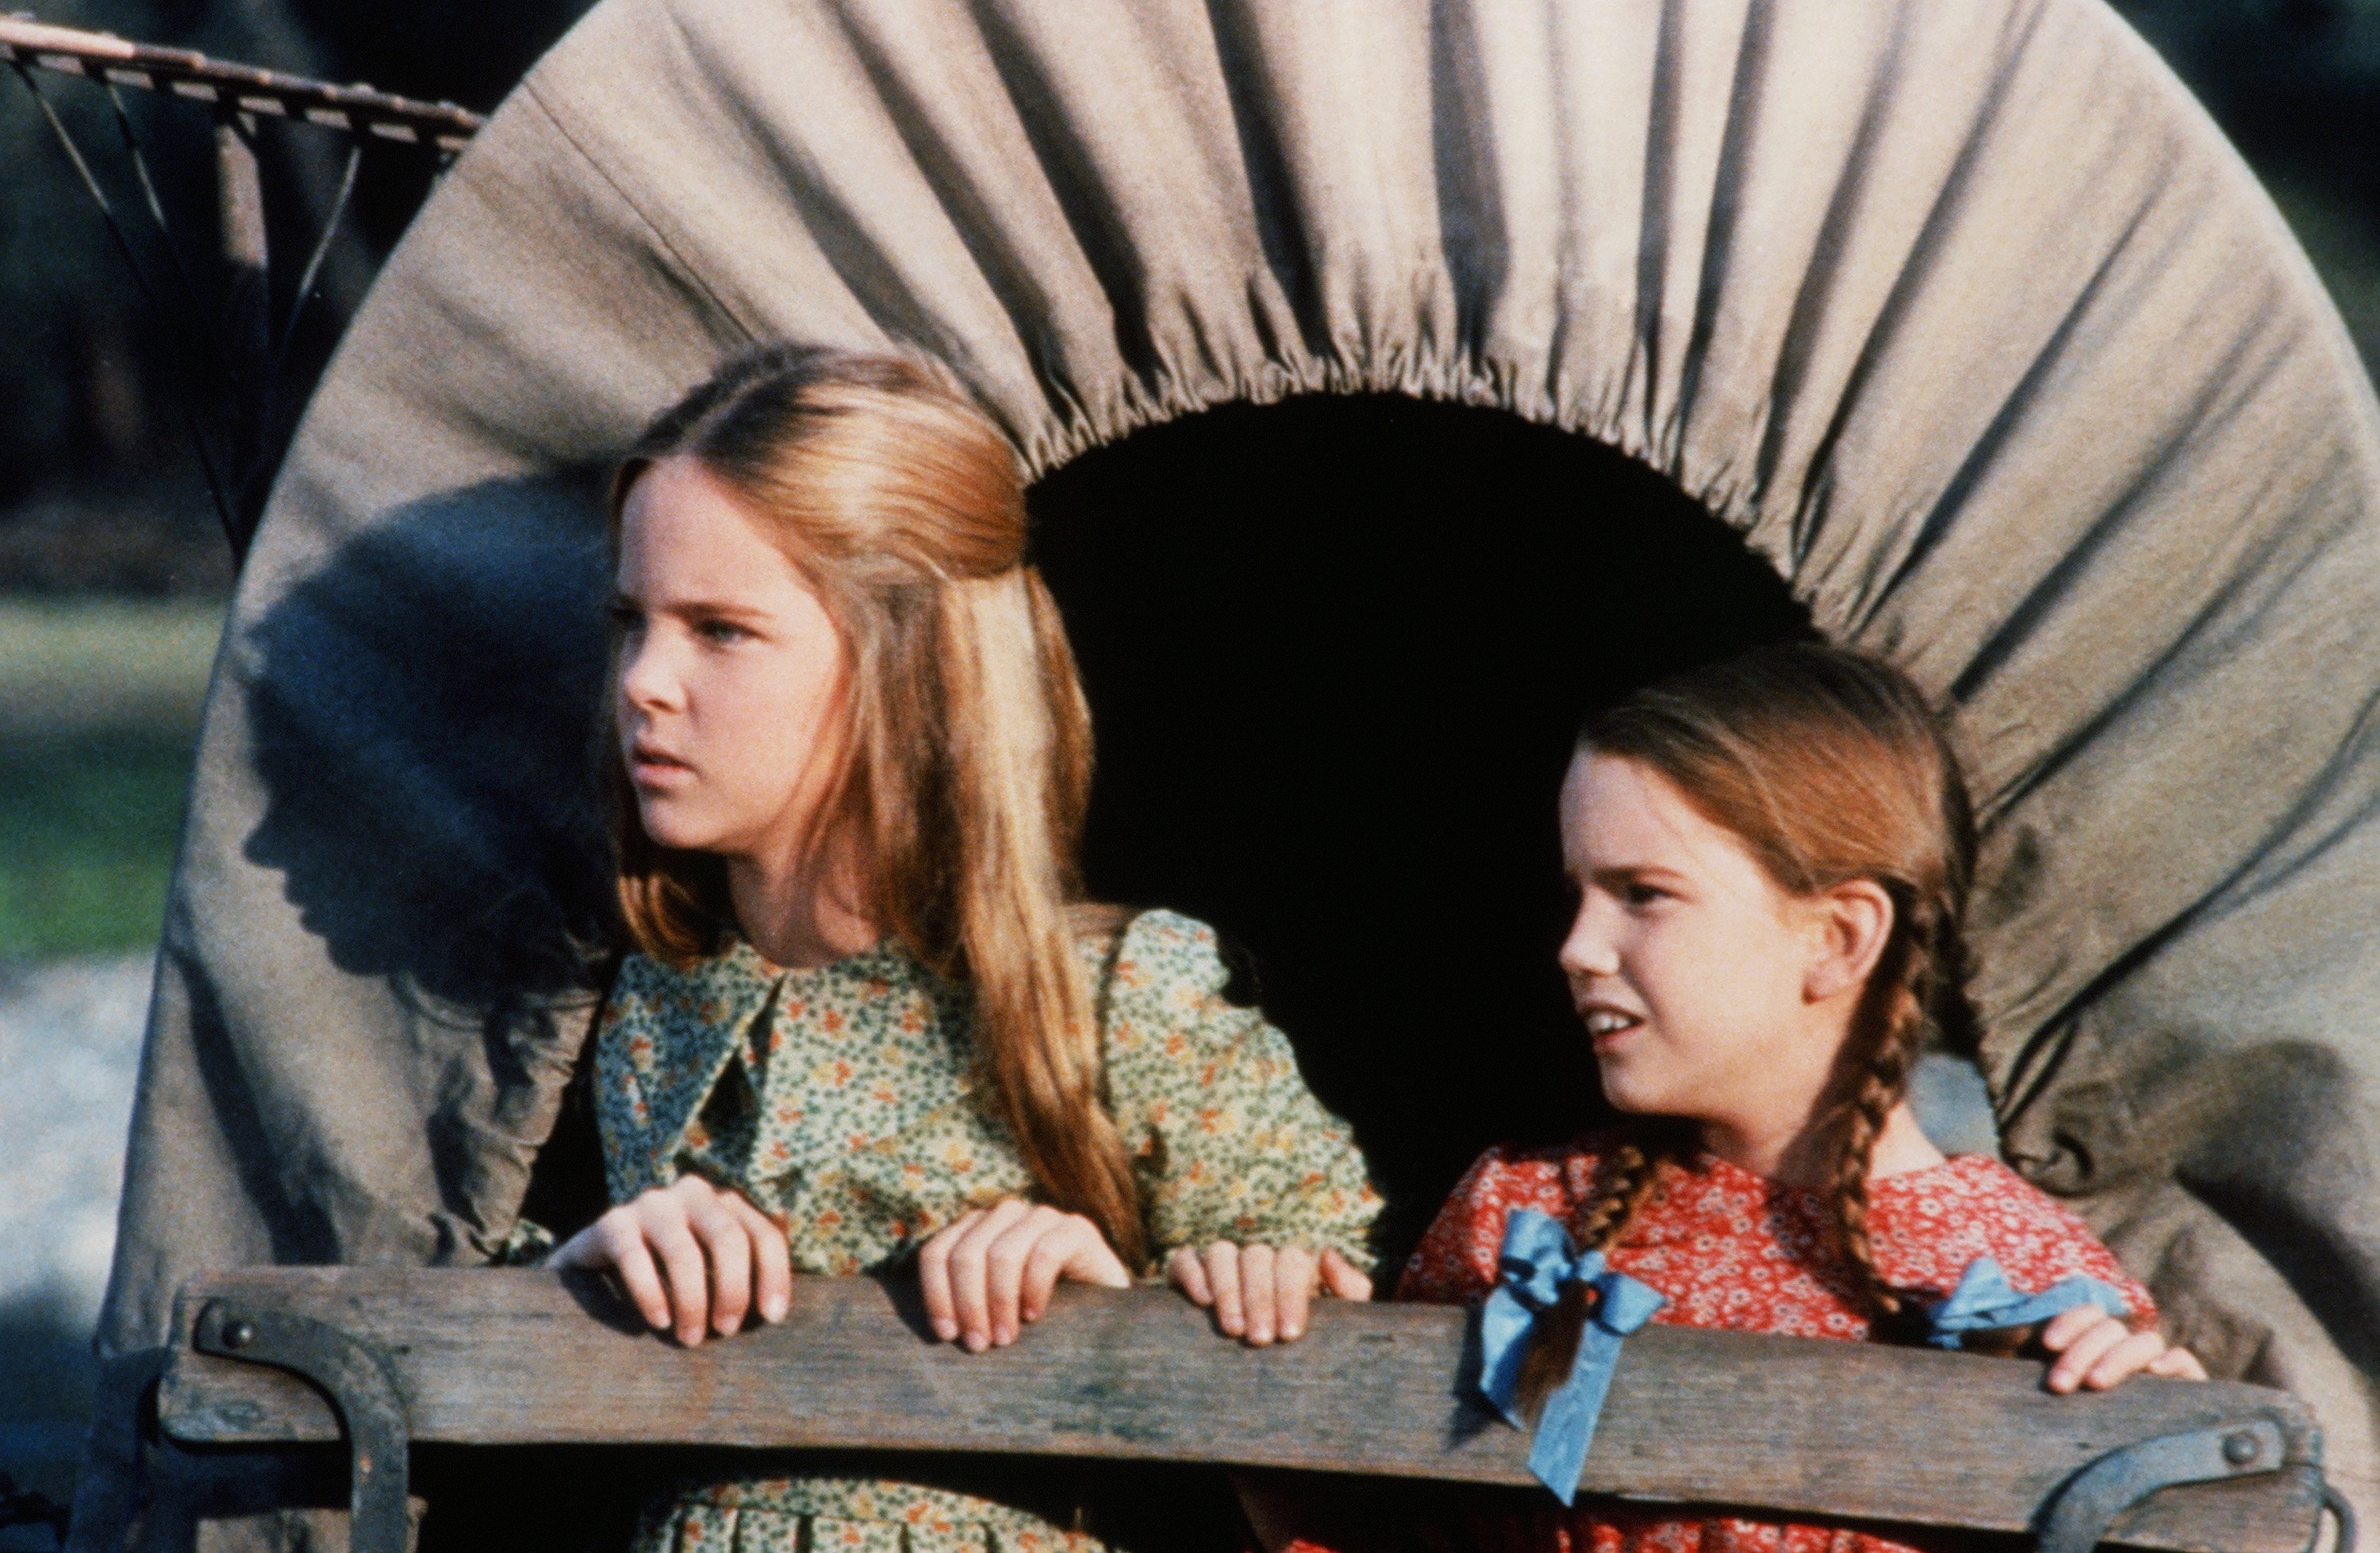 Melisssa Sue Anderson and Melissa Gilbert of 'Little House on the Prairie'